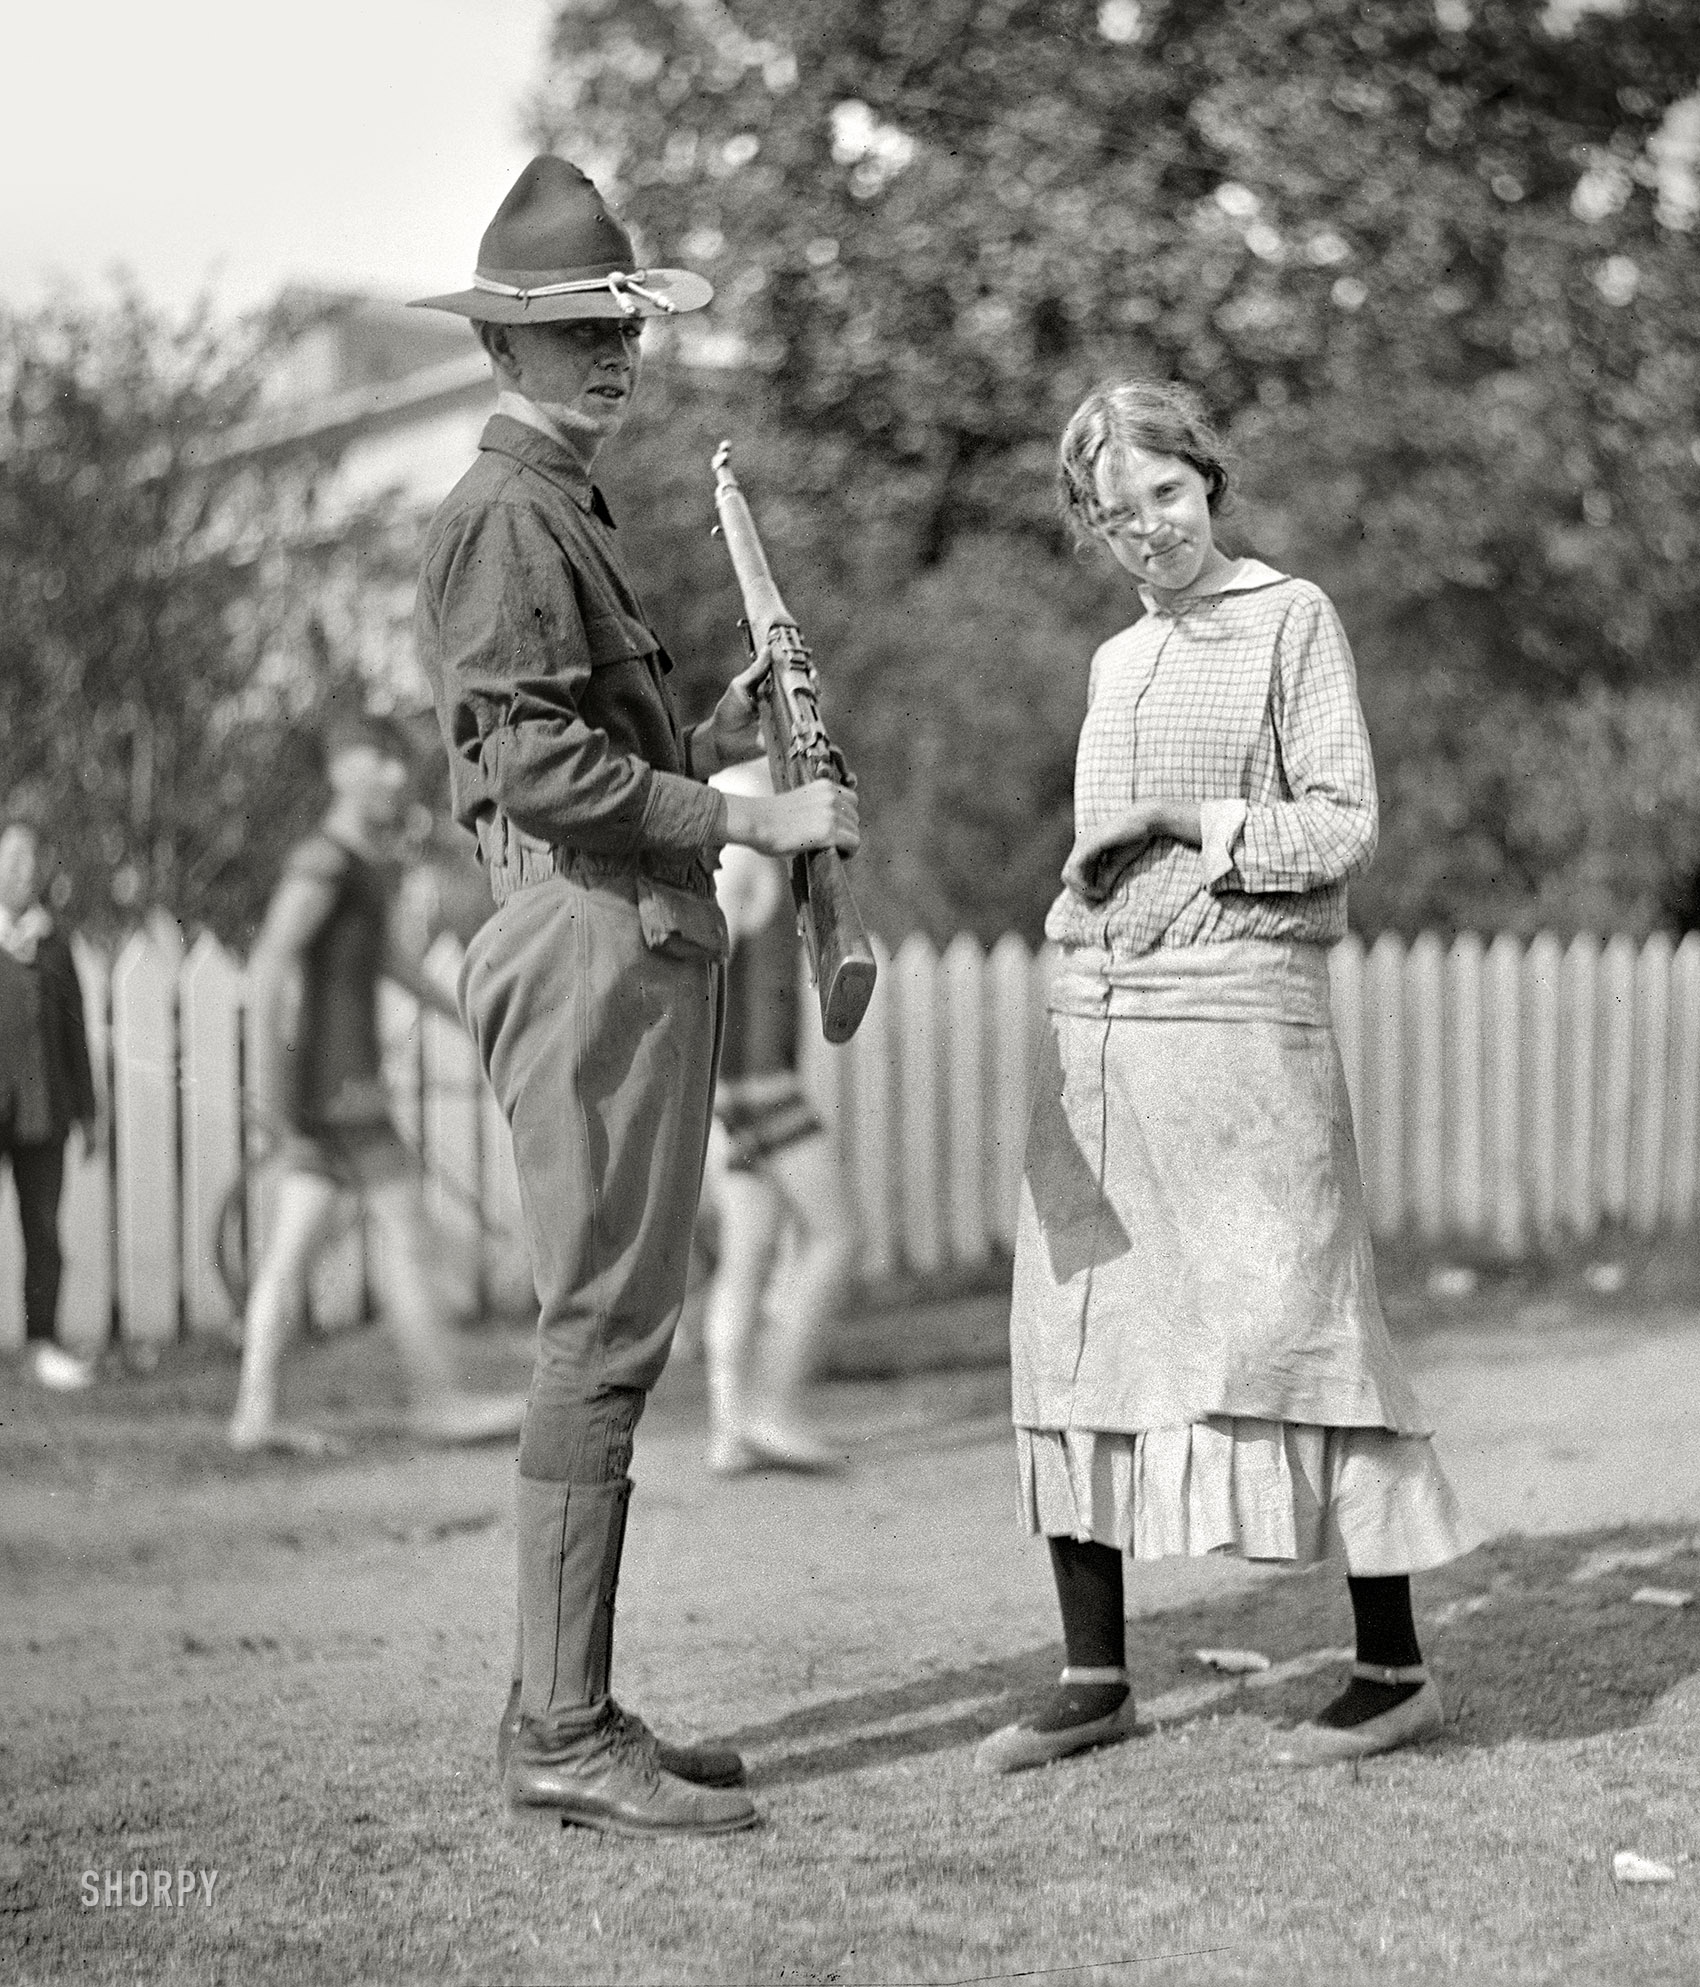 1915. "National Guard, District of Columbia, in camp." We're short on context here, so feel free to create your own narrative. Harris & Ewing. View full size.